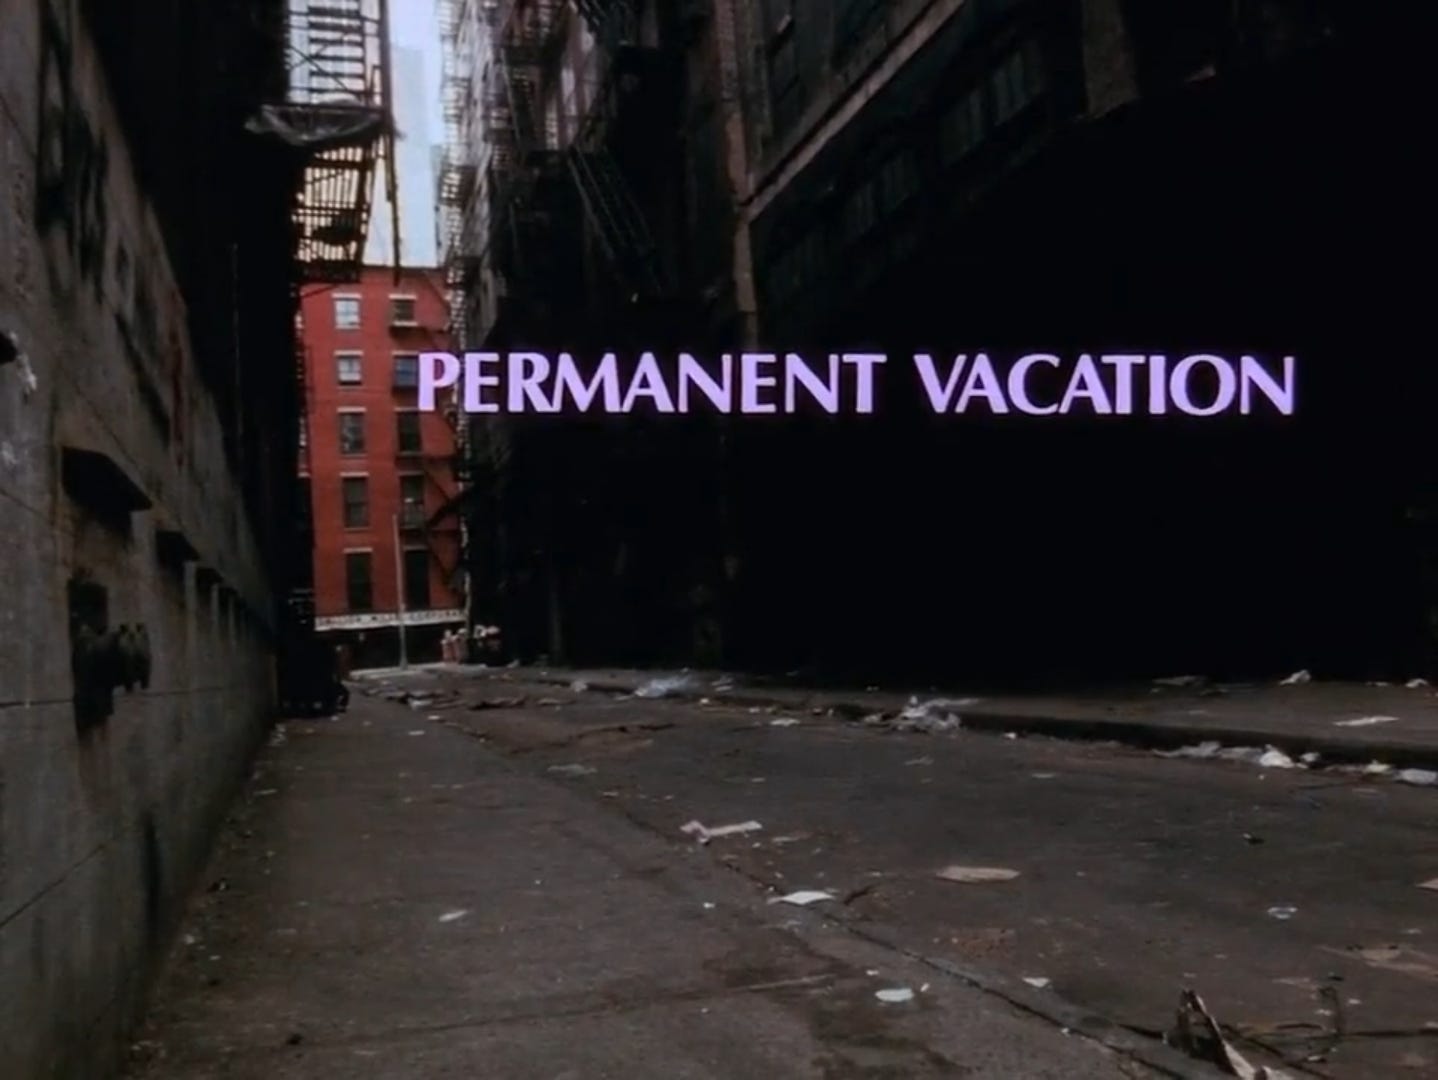 Permanent vacation (1981) title screen